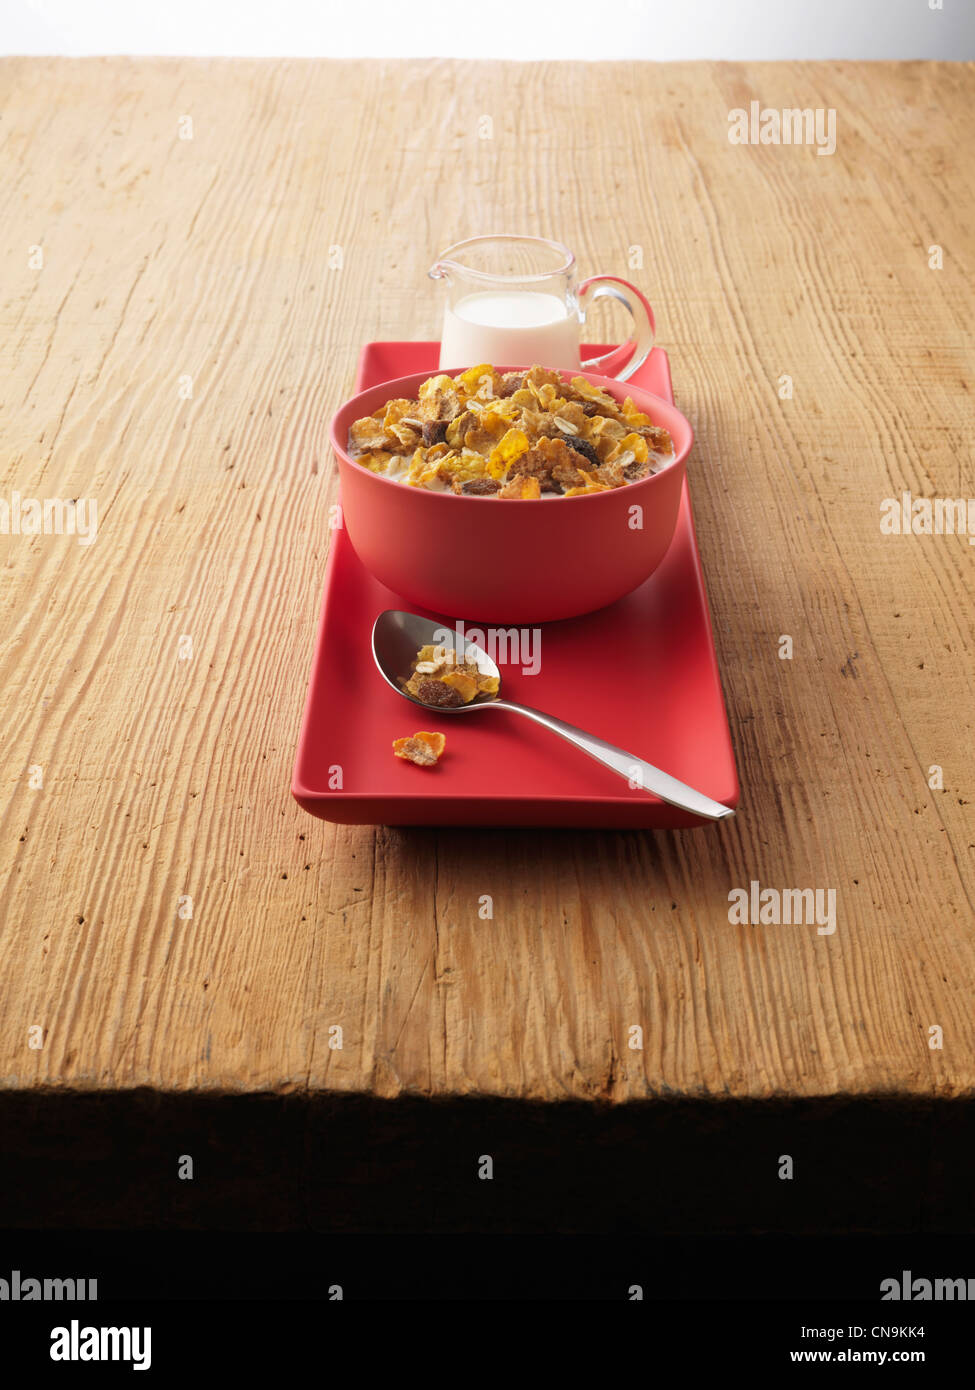 Bowl of cereal on serving tray Stock Photo